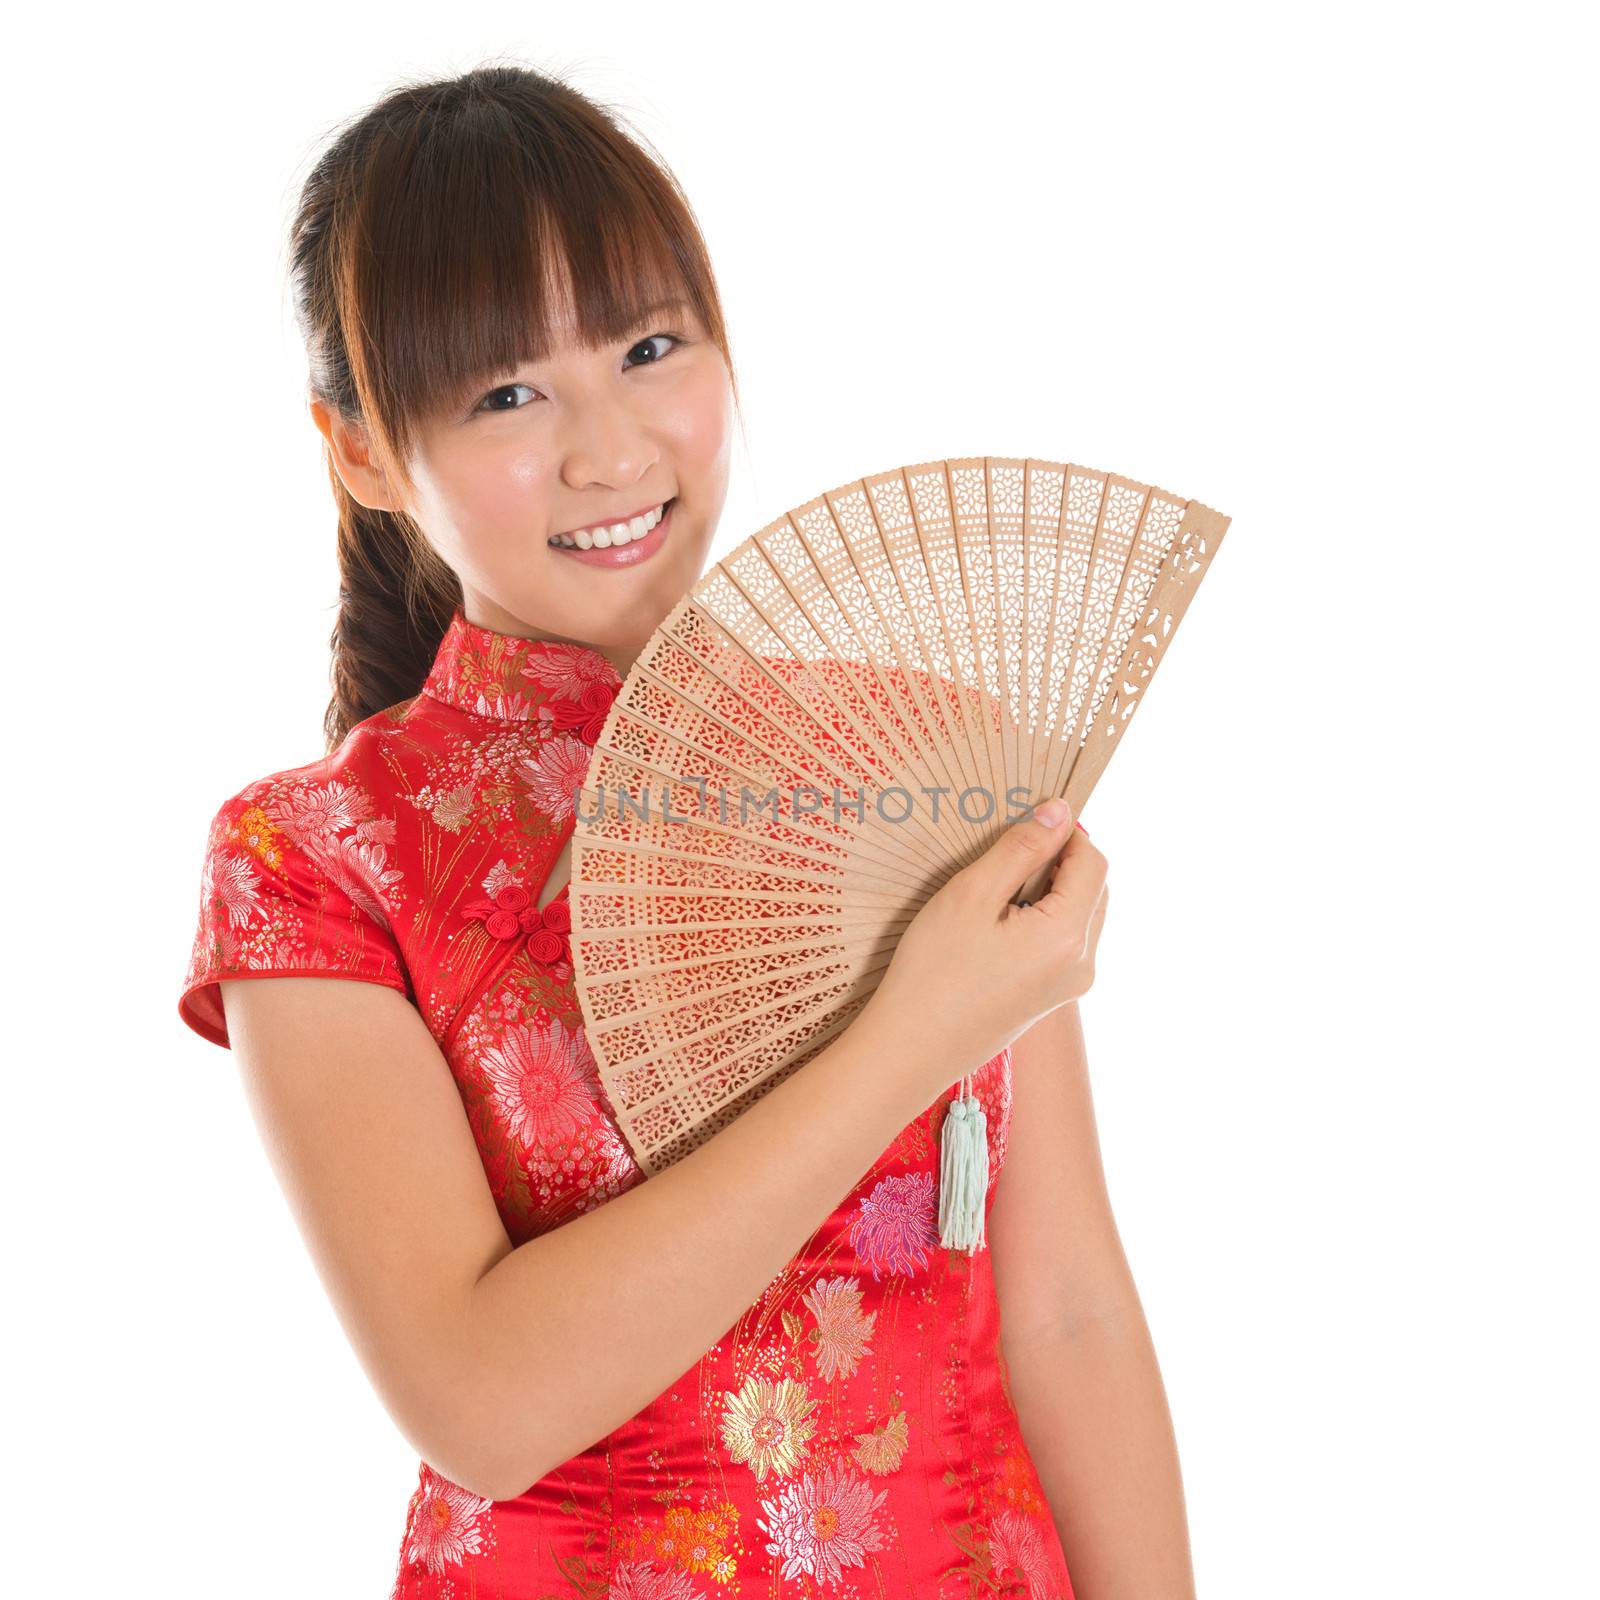 Asian woman with Chinese traditional dress cheongsam or qipao holding Chinese fan. Chinese new year concept, female model isolated on white background.